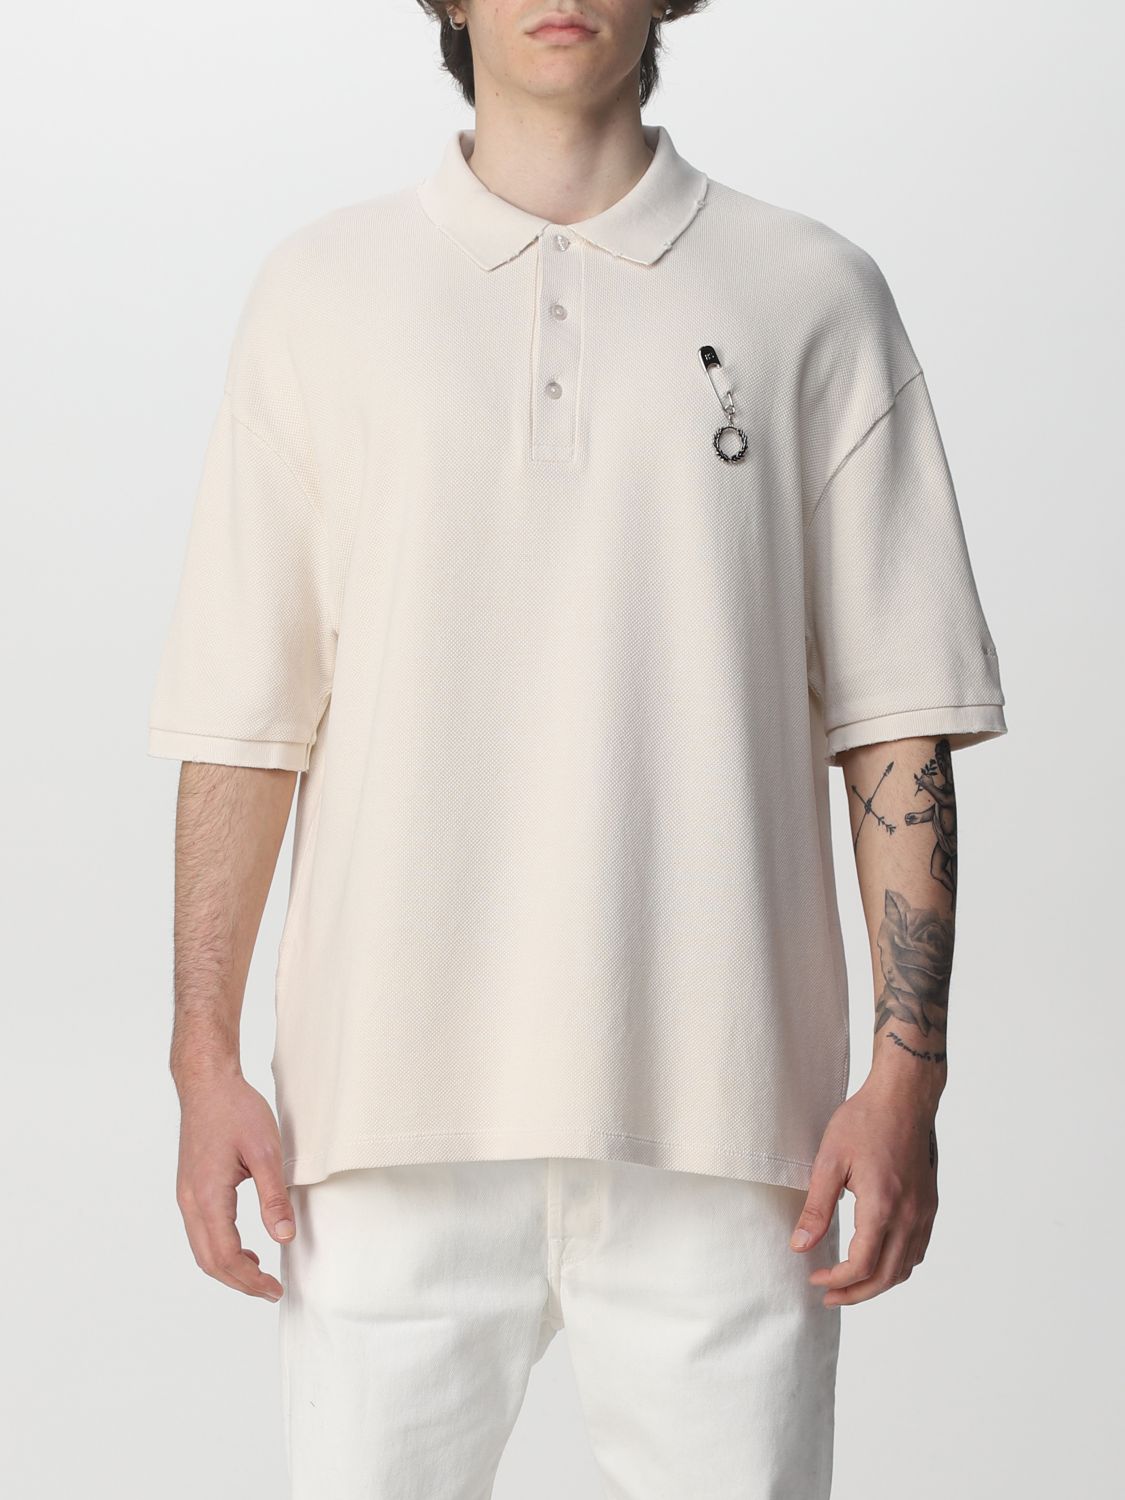 Fred Perry By Raf Simons polo shirt for man